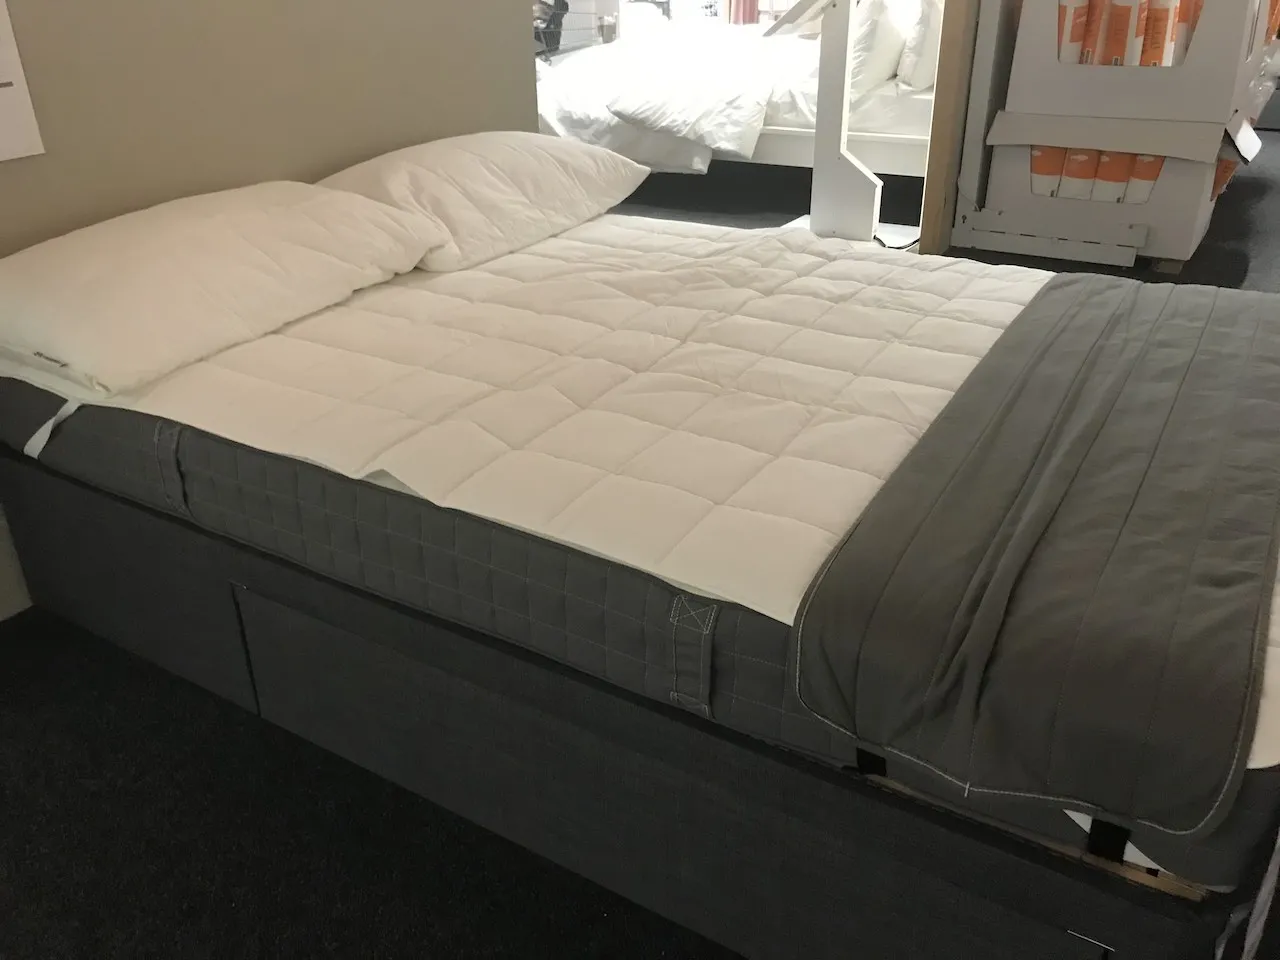 Are Ikea Matresses Any Good Ultimate Ikea Bed Review John Ryan By Design